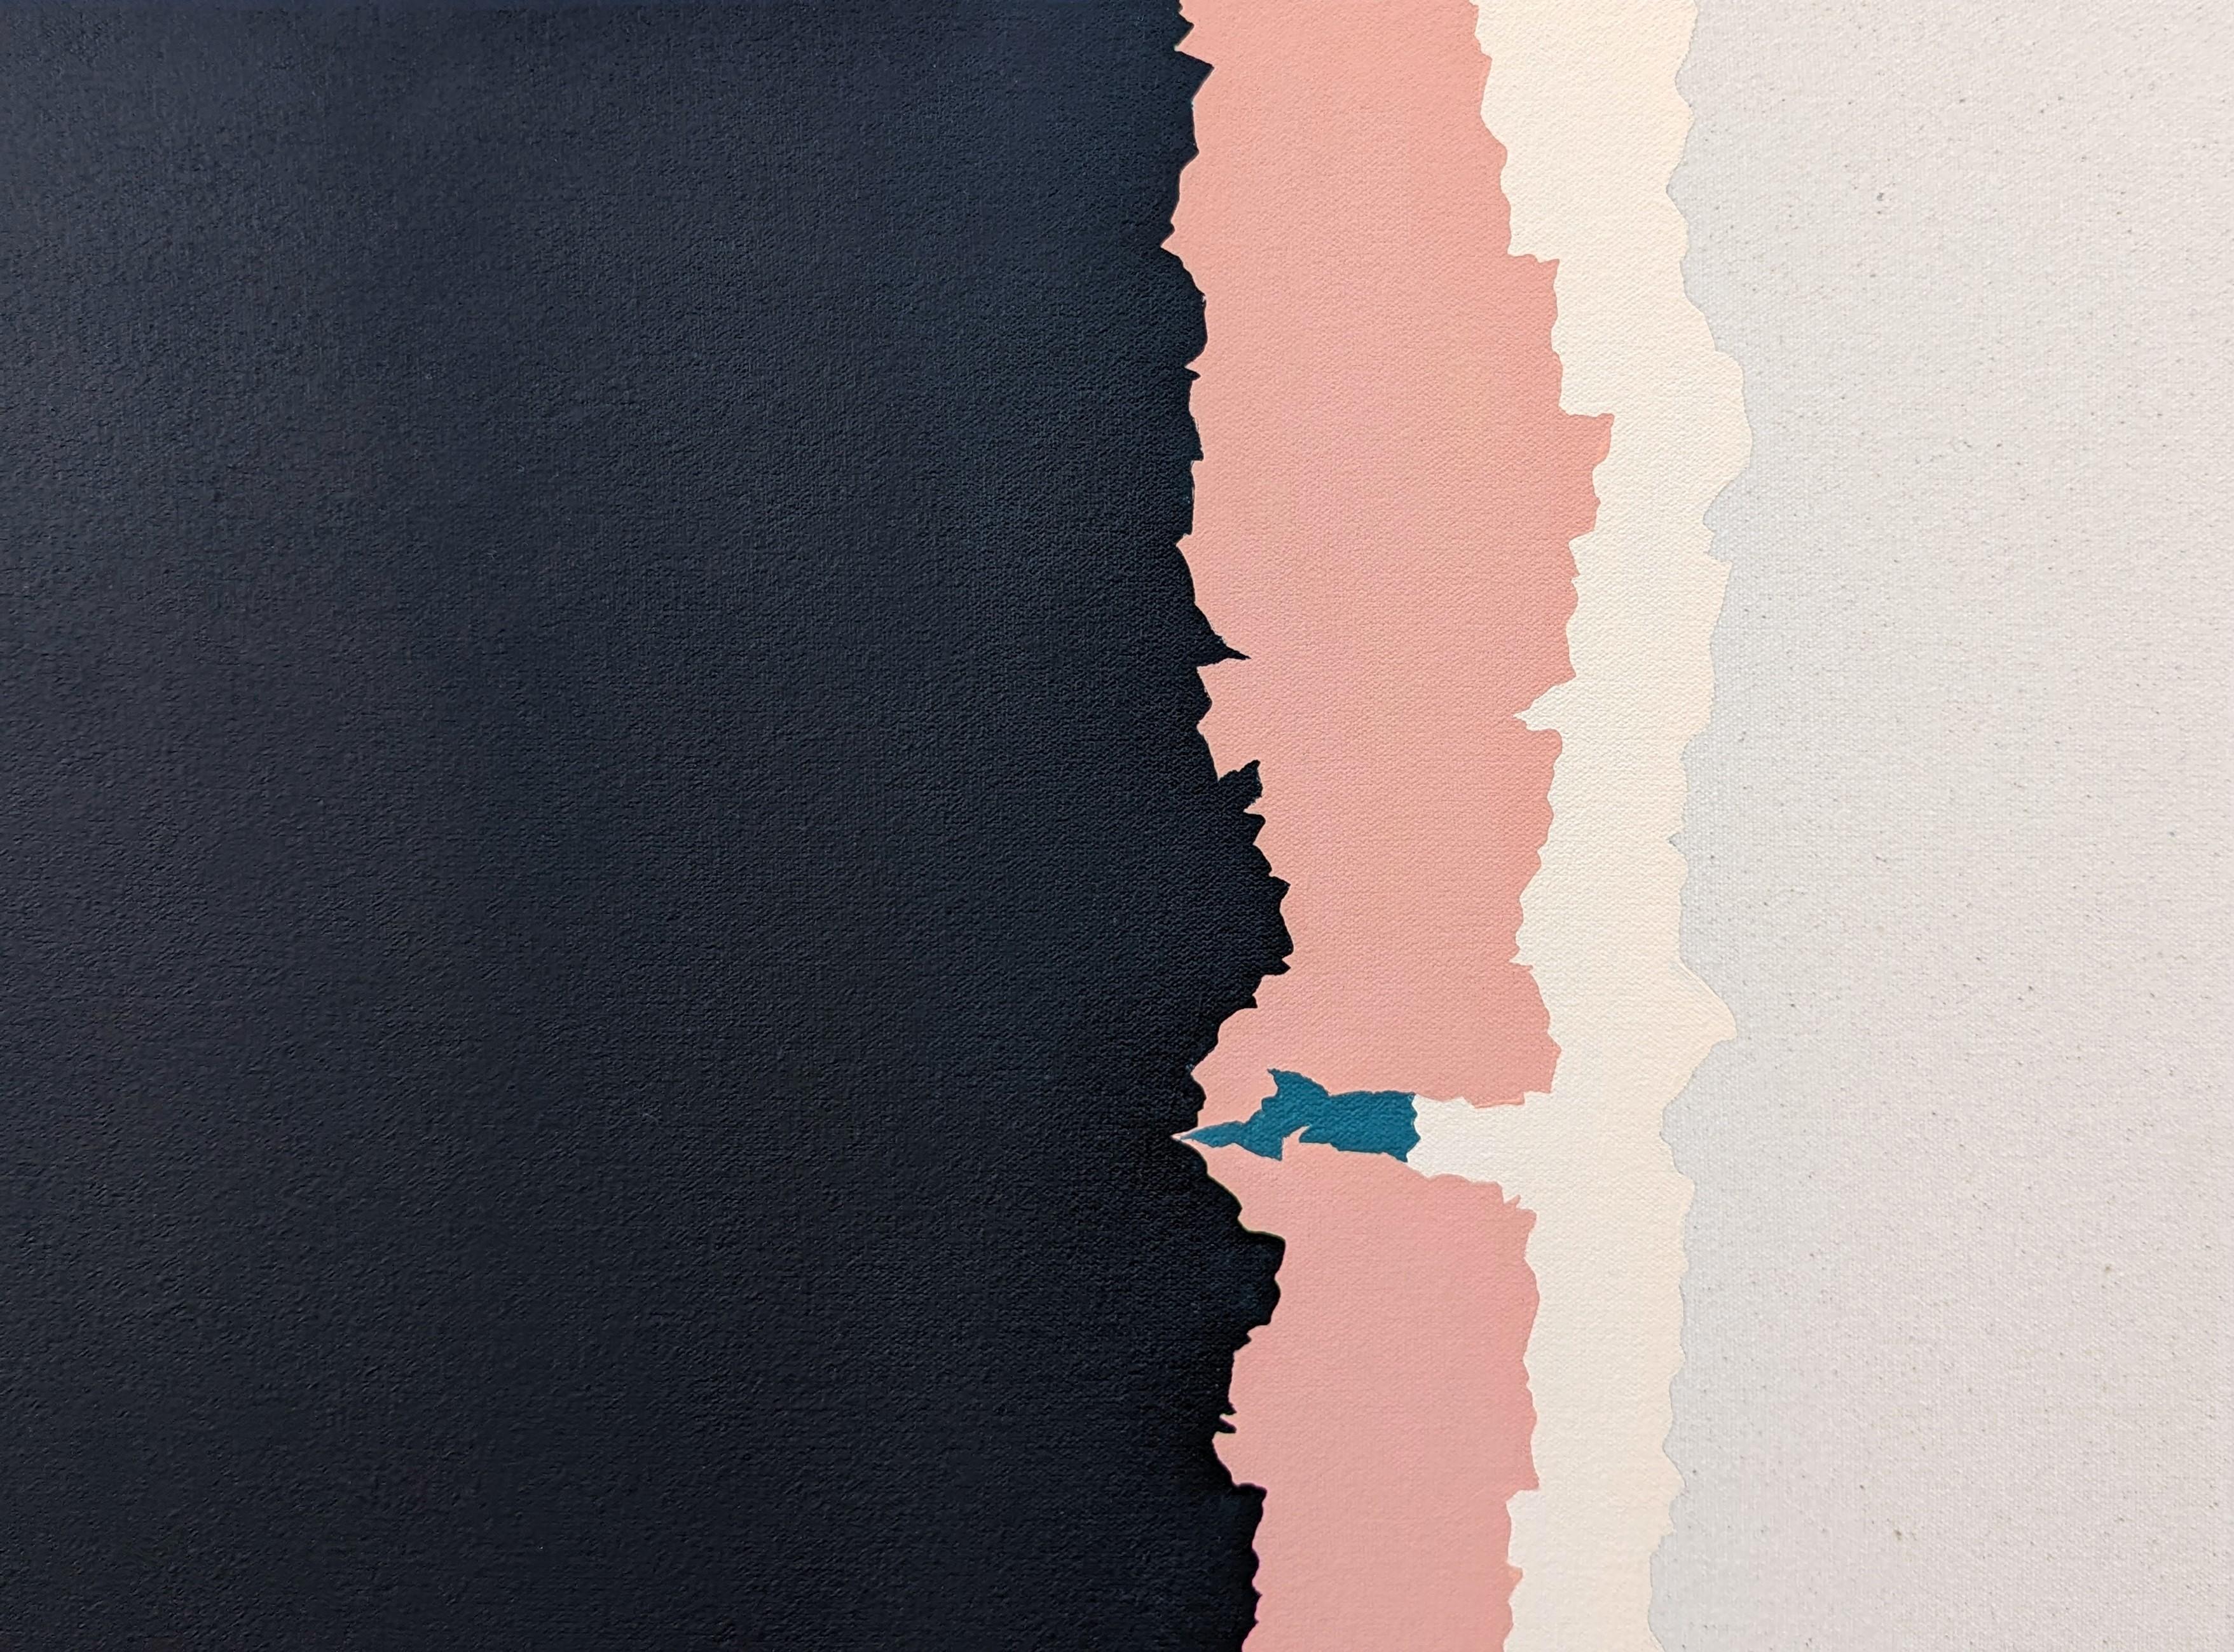 Contemporary abstract geometric painting by Houston-based artist Holland Geibel. The work features layers of rectangular shapes in various tones of blue, teal, pink, and white. Signed, titled, and dated on the reverse. Currently unframed, but